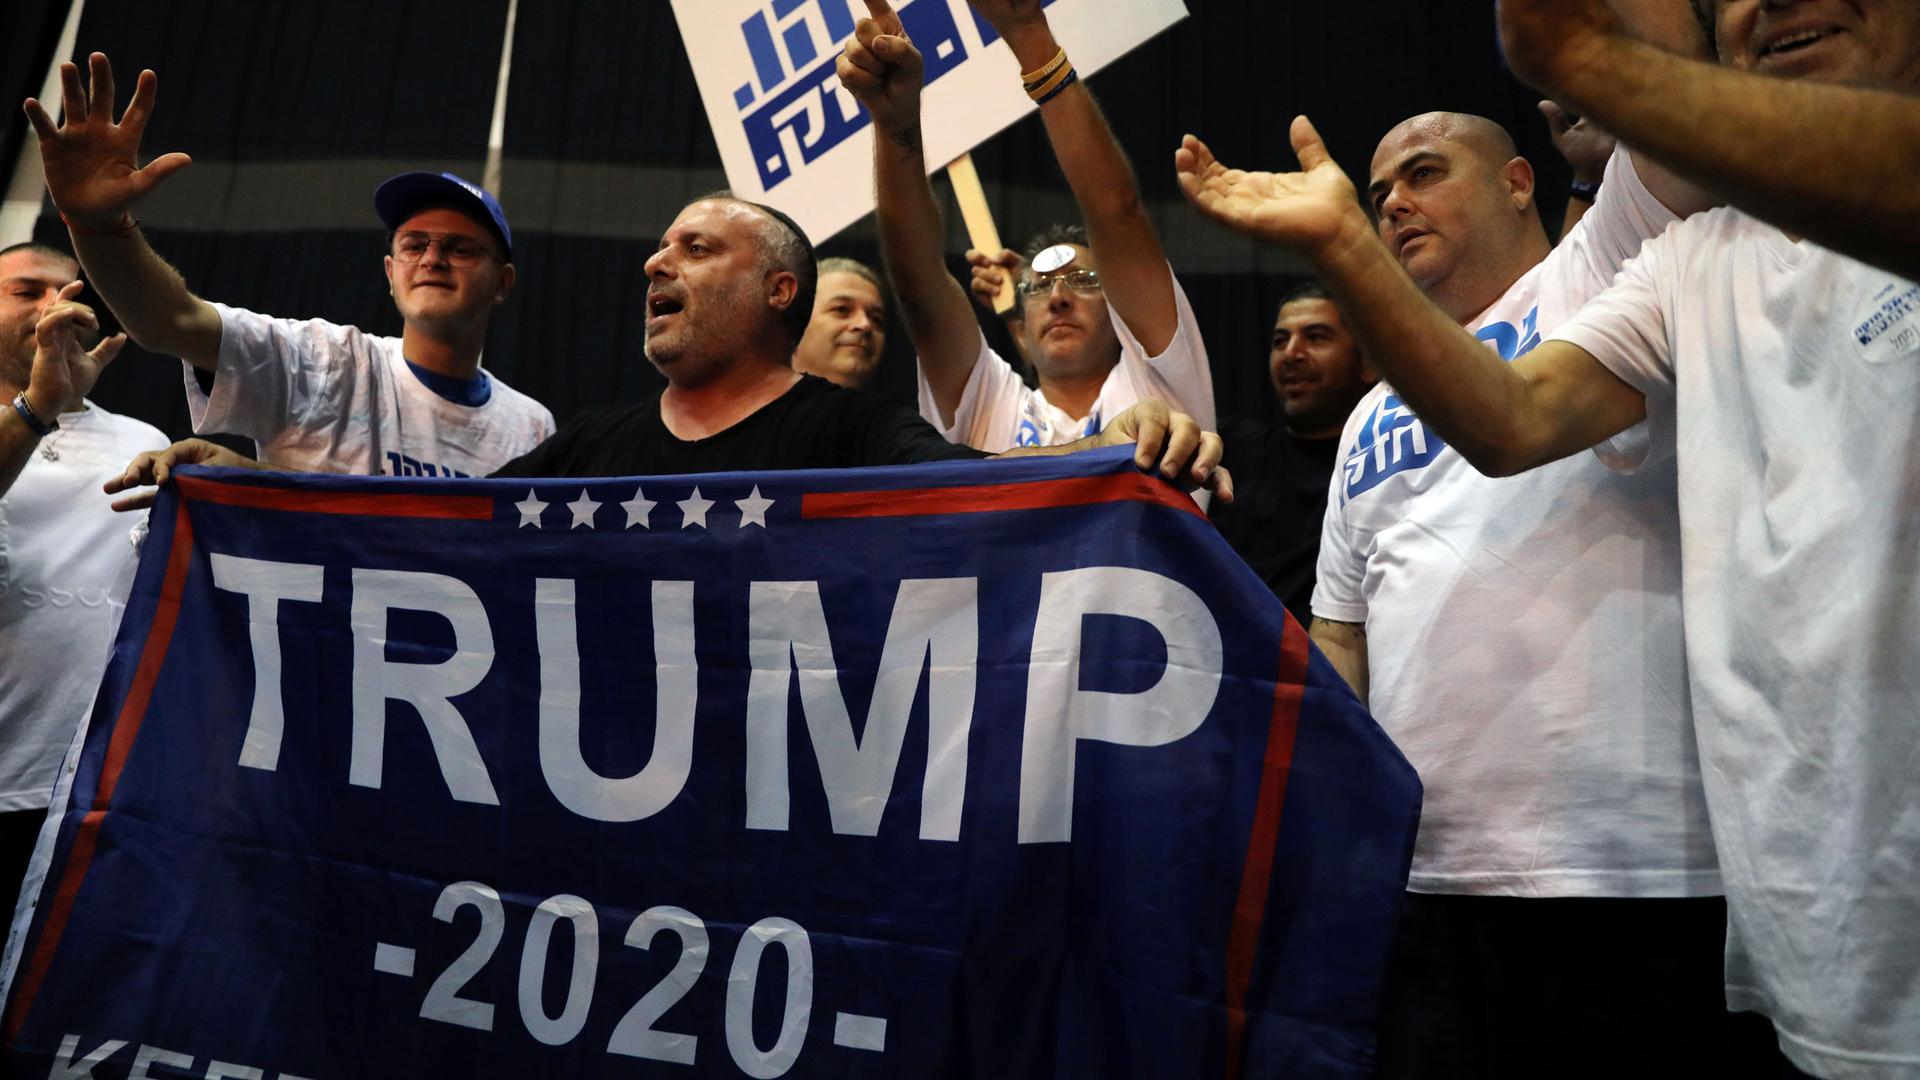 Supporters of Israeli Prime Minister Benjamin Netanyahu's Likud party react to exit polls in Israel's parliamentary election at the party headquarters in Tel Aviv, Israel, on Sept. 17, 2019.  One sign says "Trump 2020" as well. 